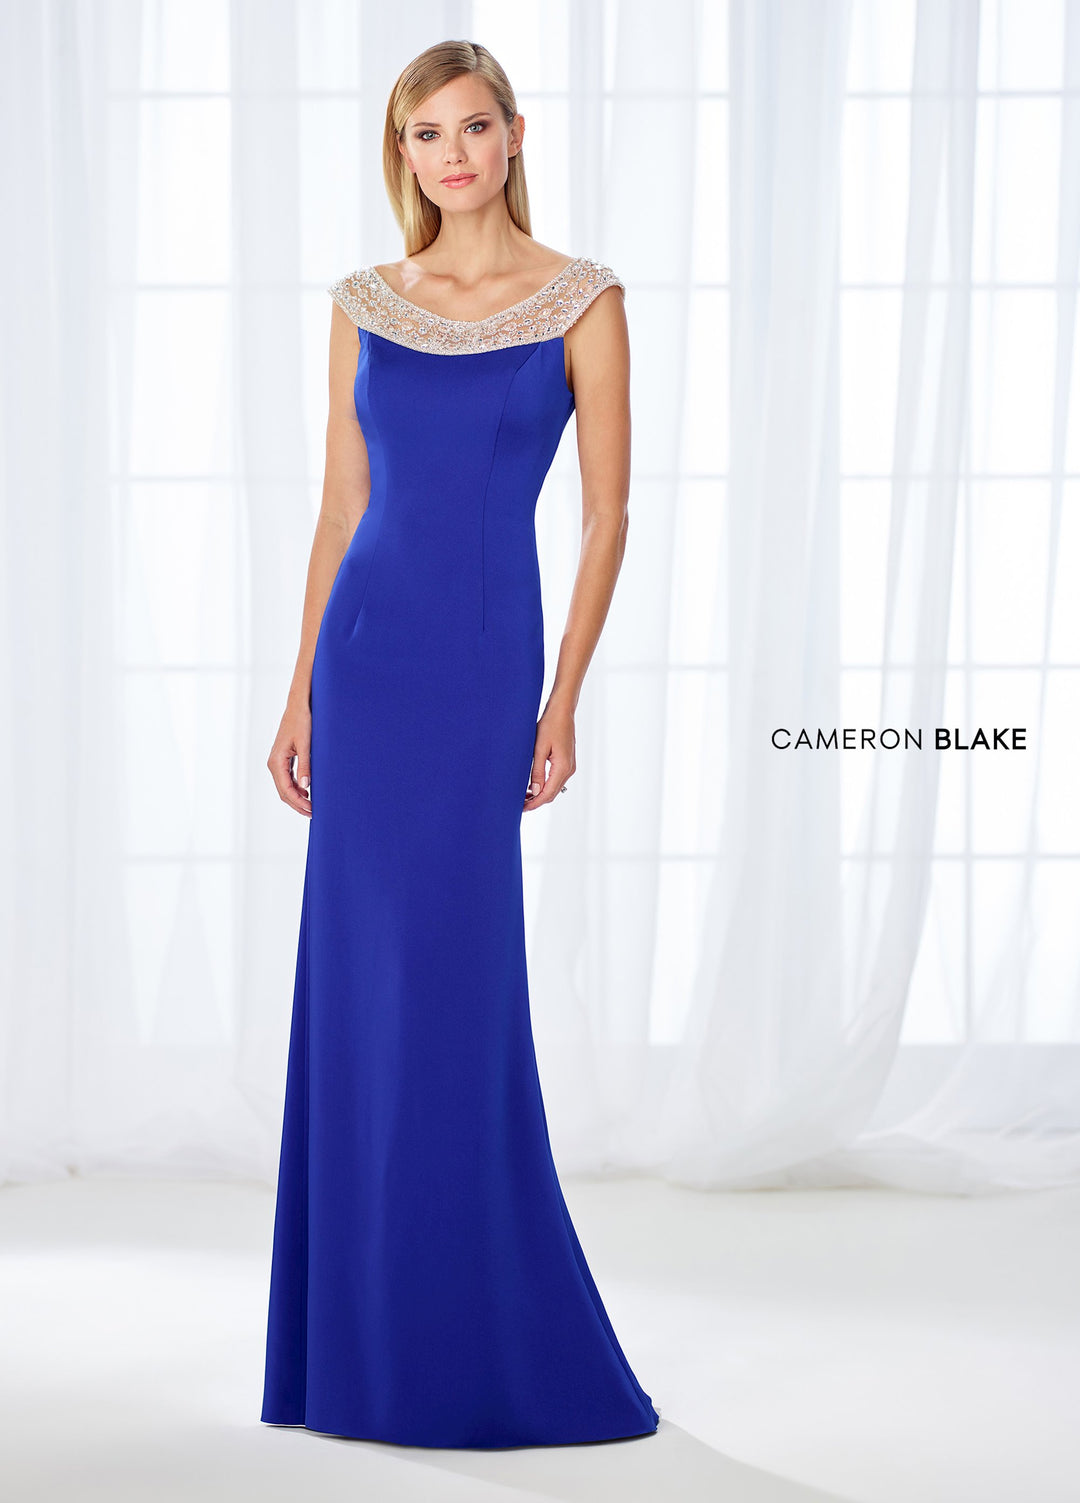 Cameron Blake Jeweled Neck Gown Style 118663 Size 14